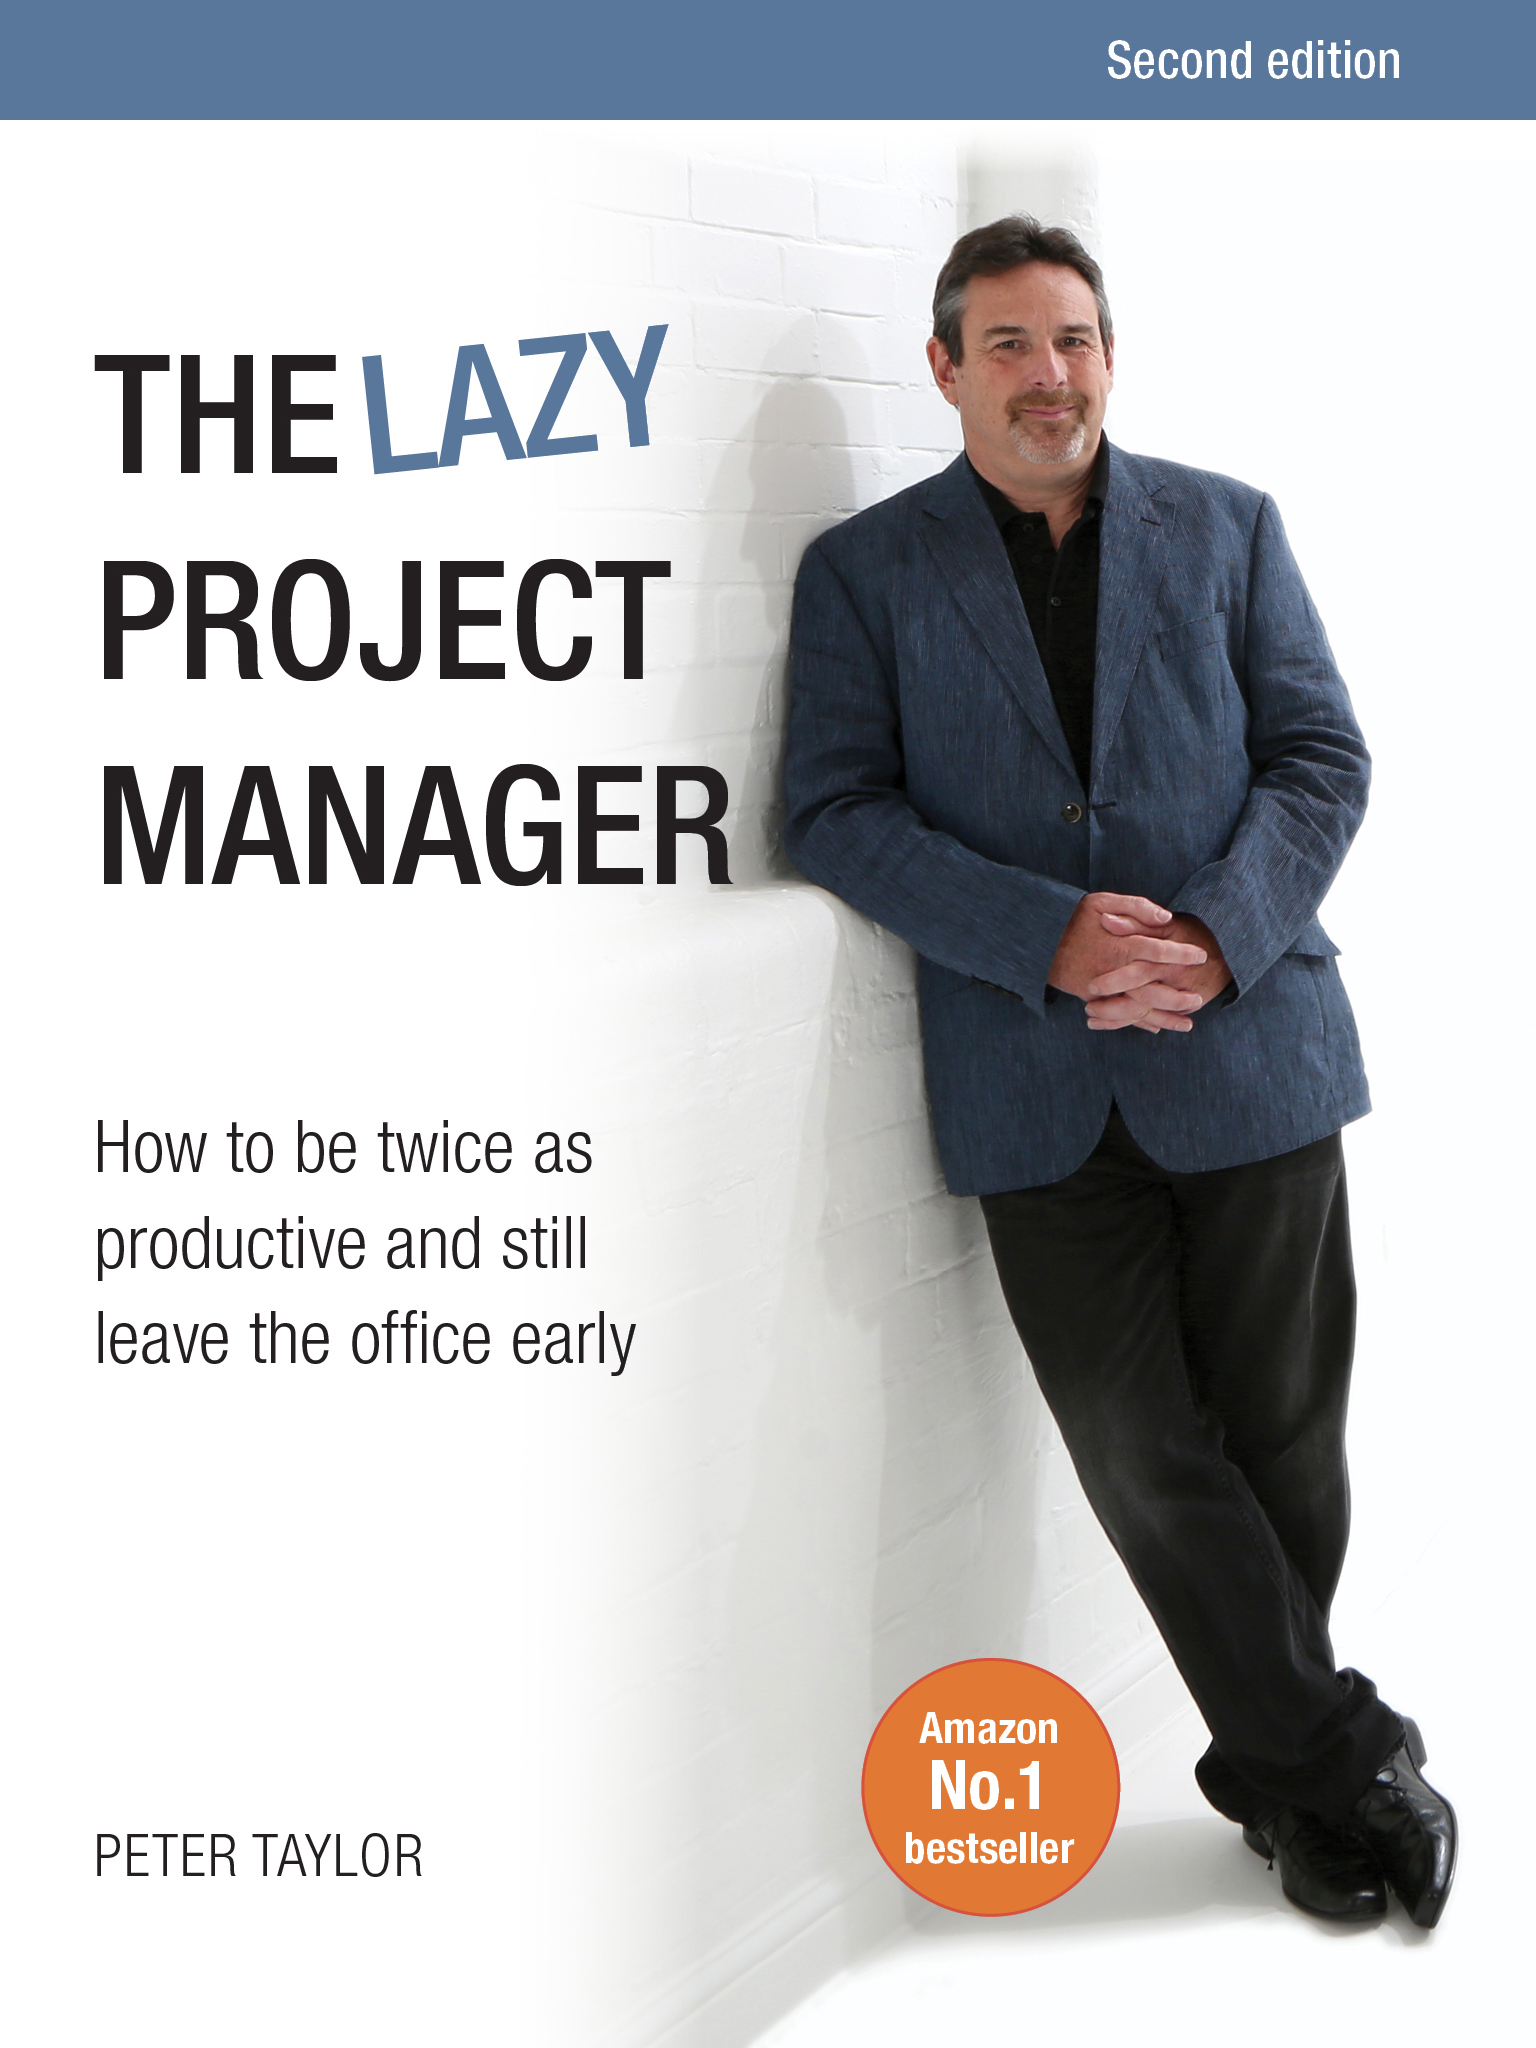 The lazy project manager, second edition